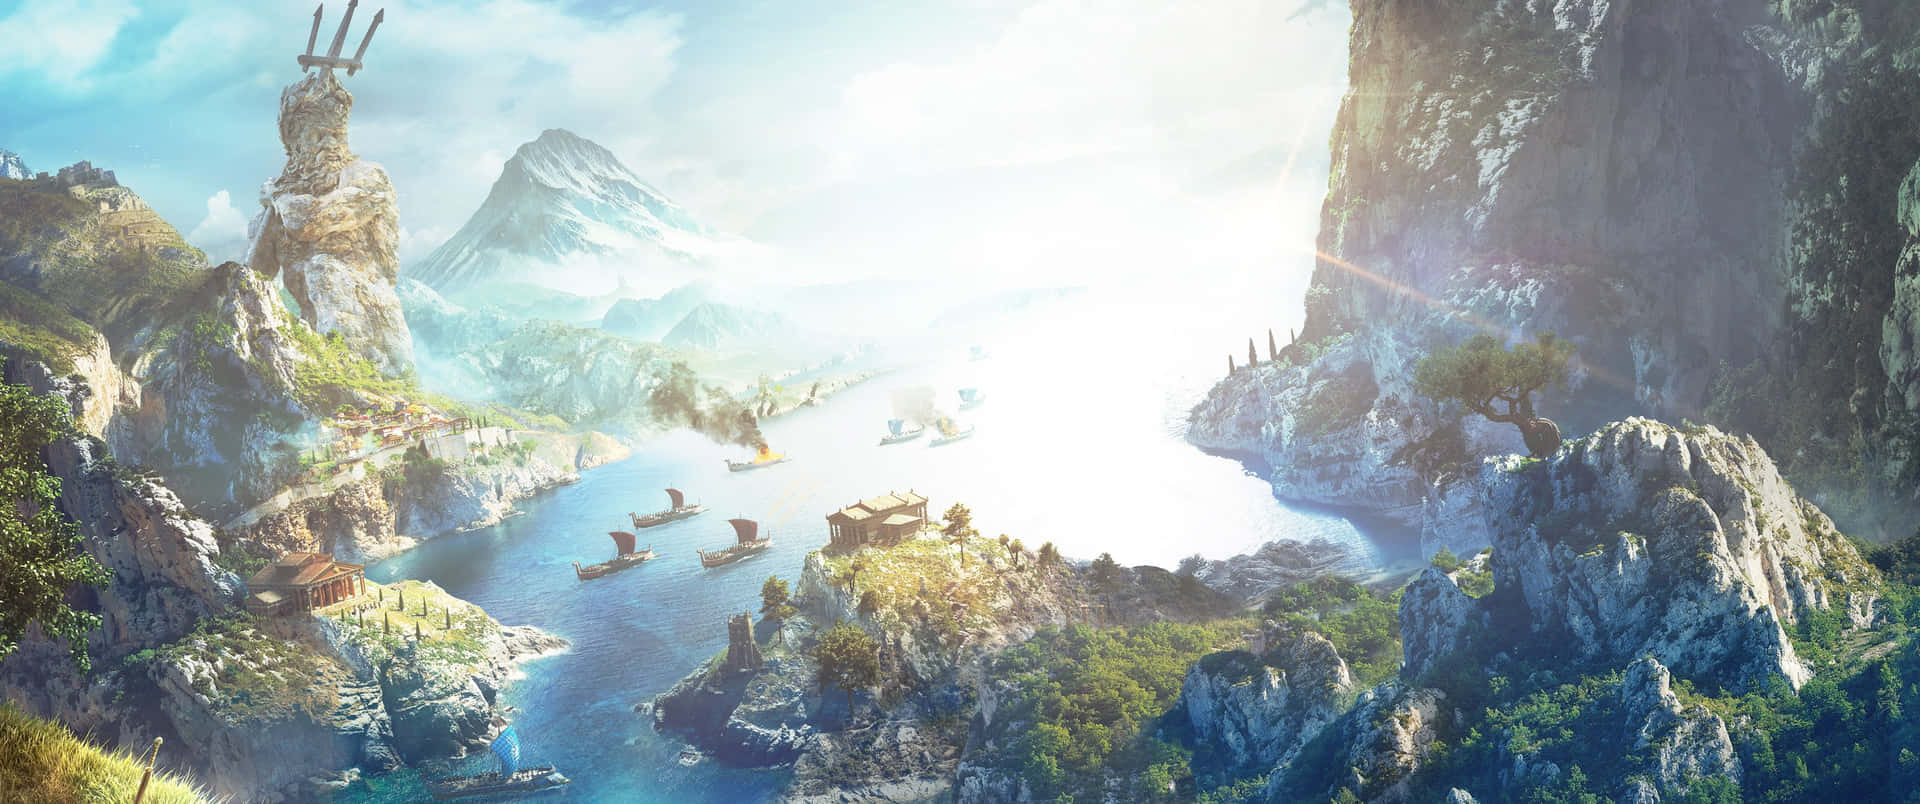 Ocean Scenery Assassin's Creed Odyssey Ultra Wide Gaming Wallpaper